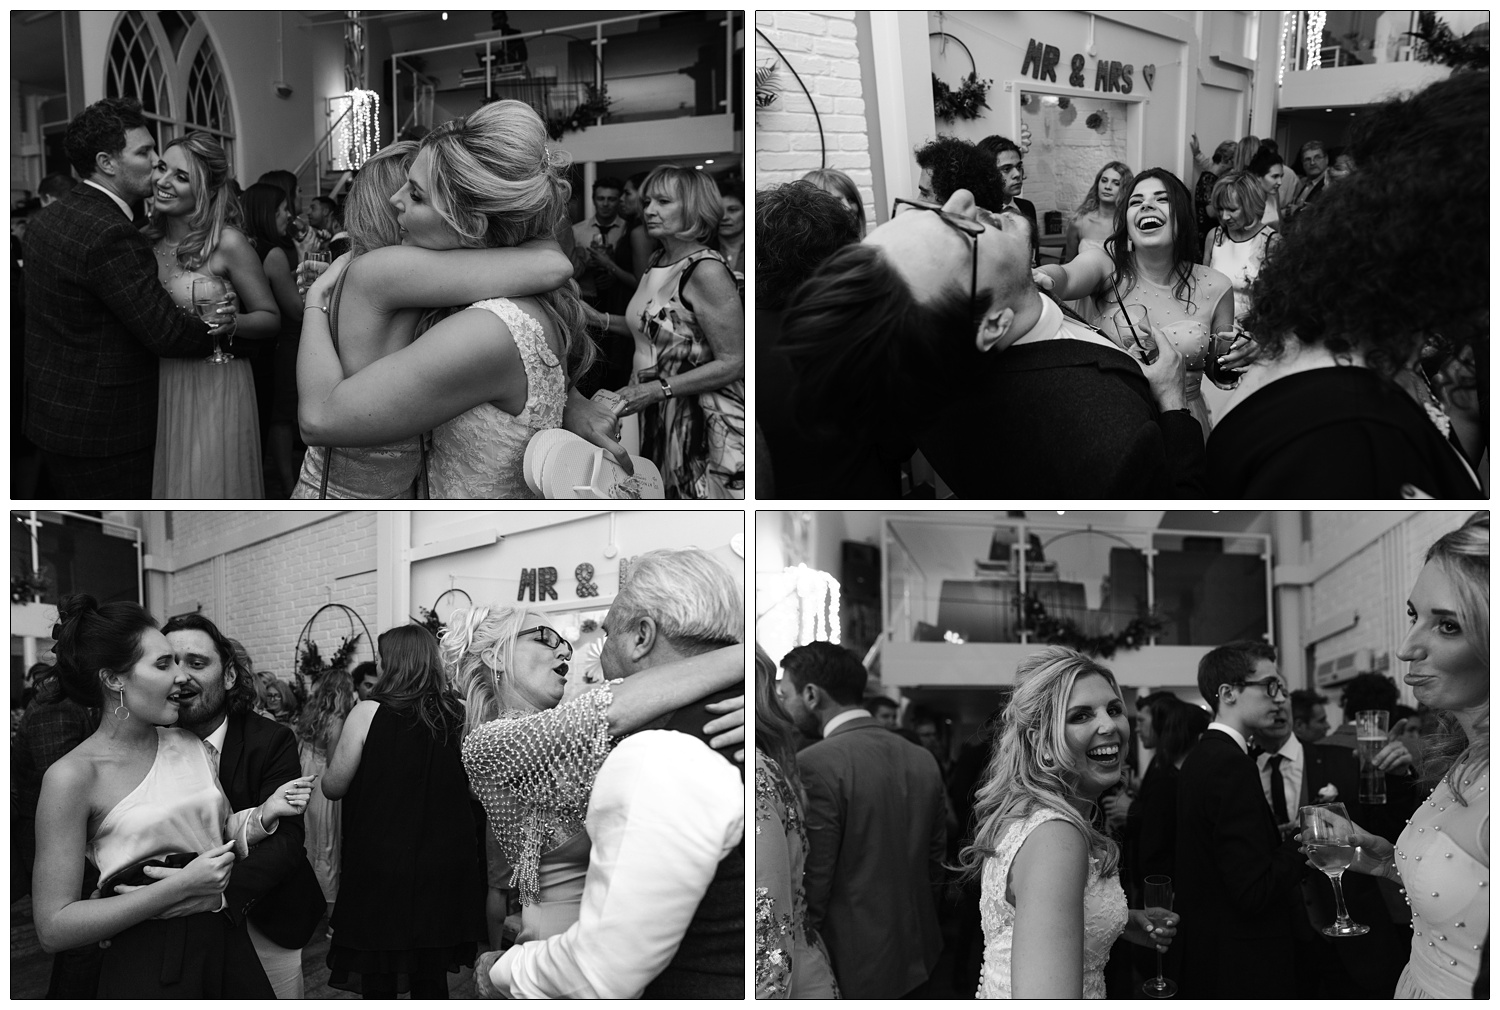 Candid black and white photographs from a wedding reception at the Old Parish Rooms in Rayleigh.